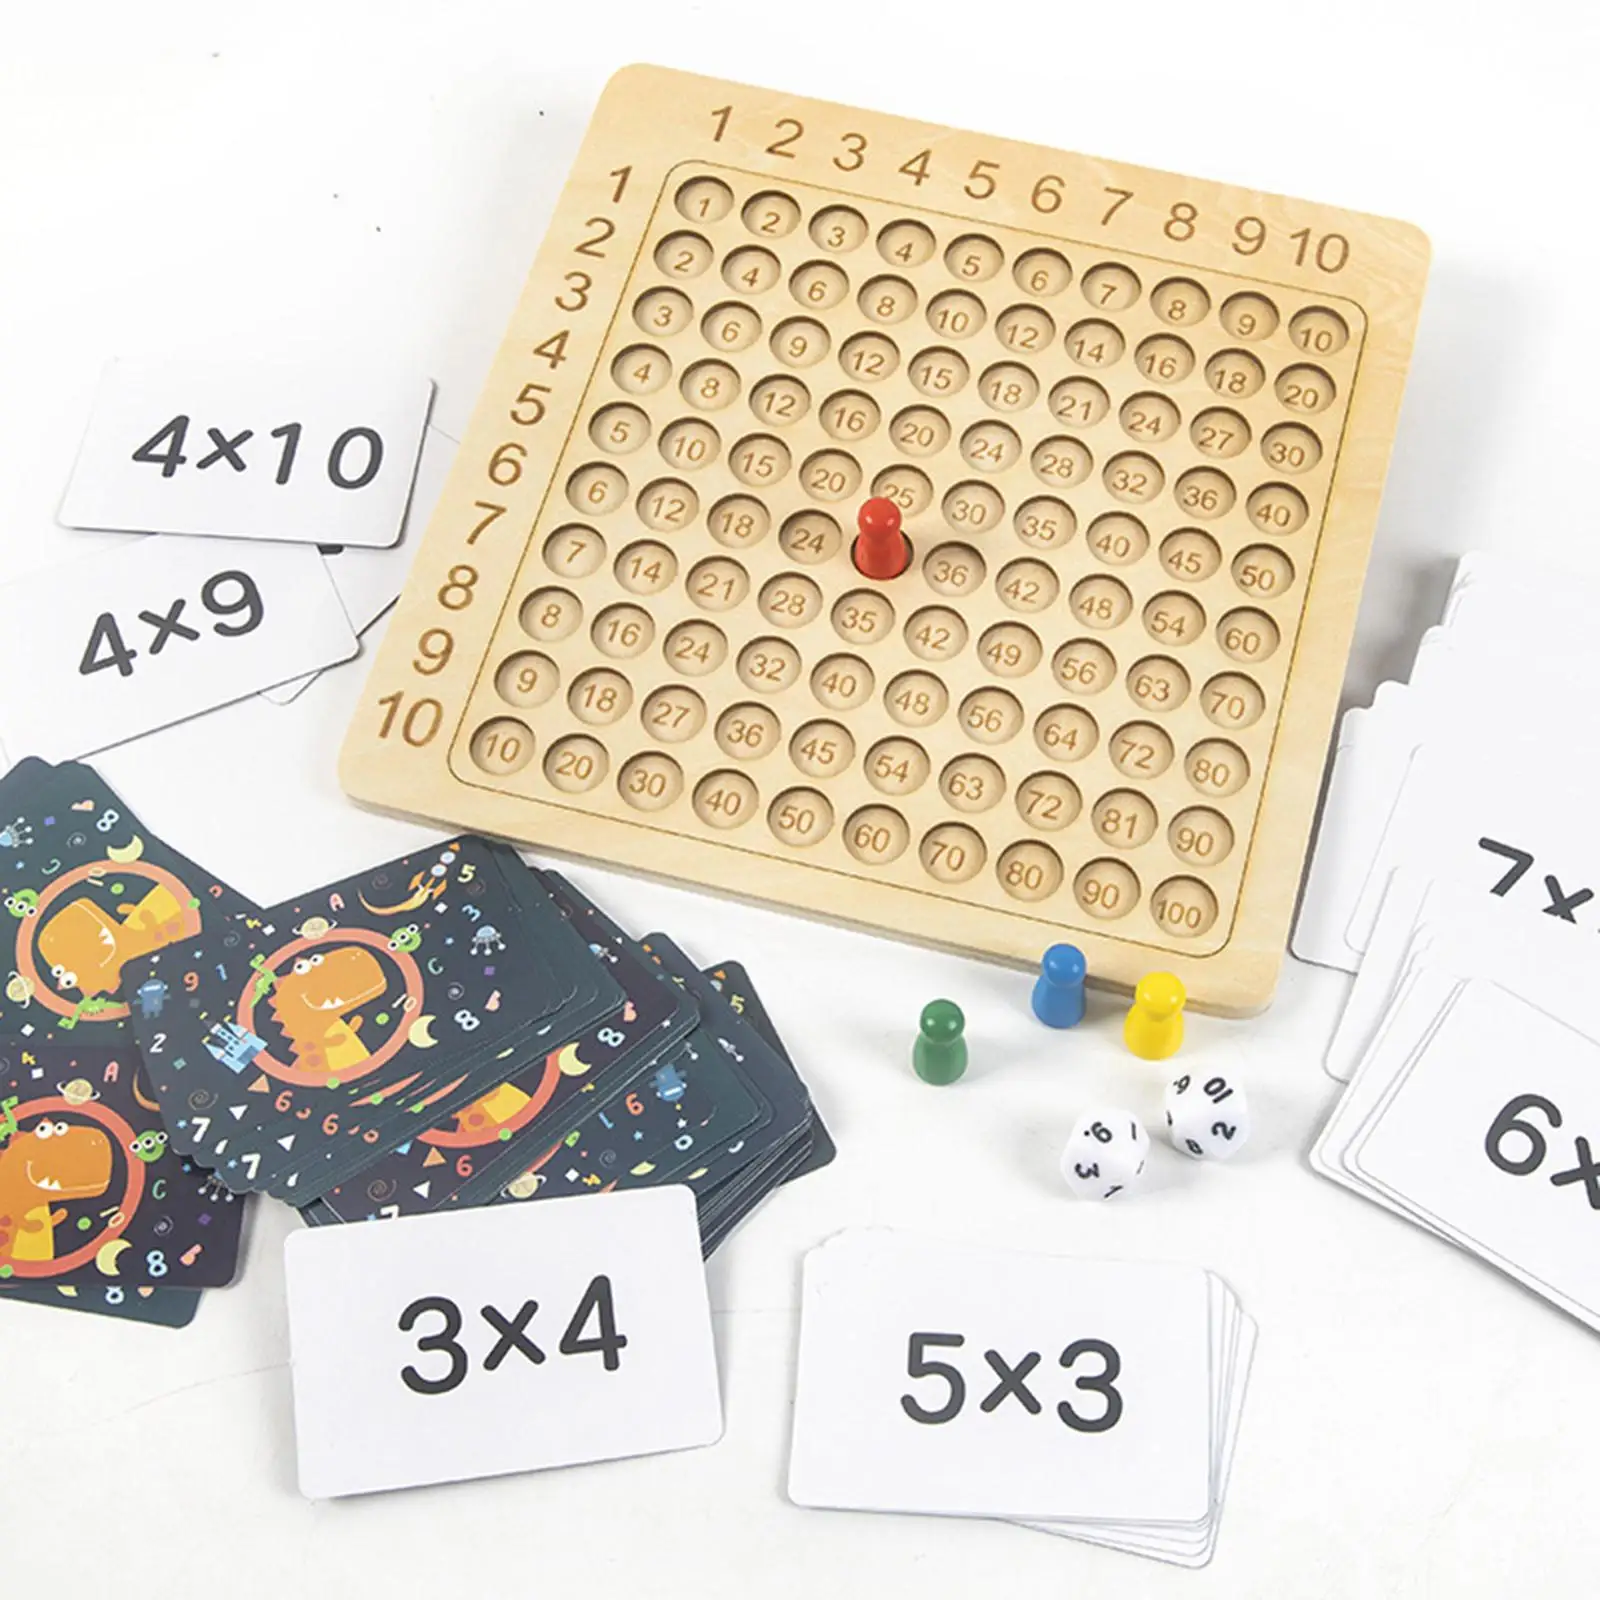 Baby Wooden Blocks Toy, Mathematics Educational Wooden Toys Multiplication Table